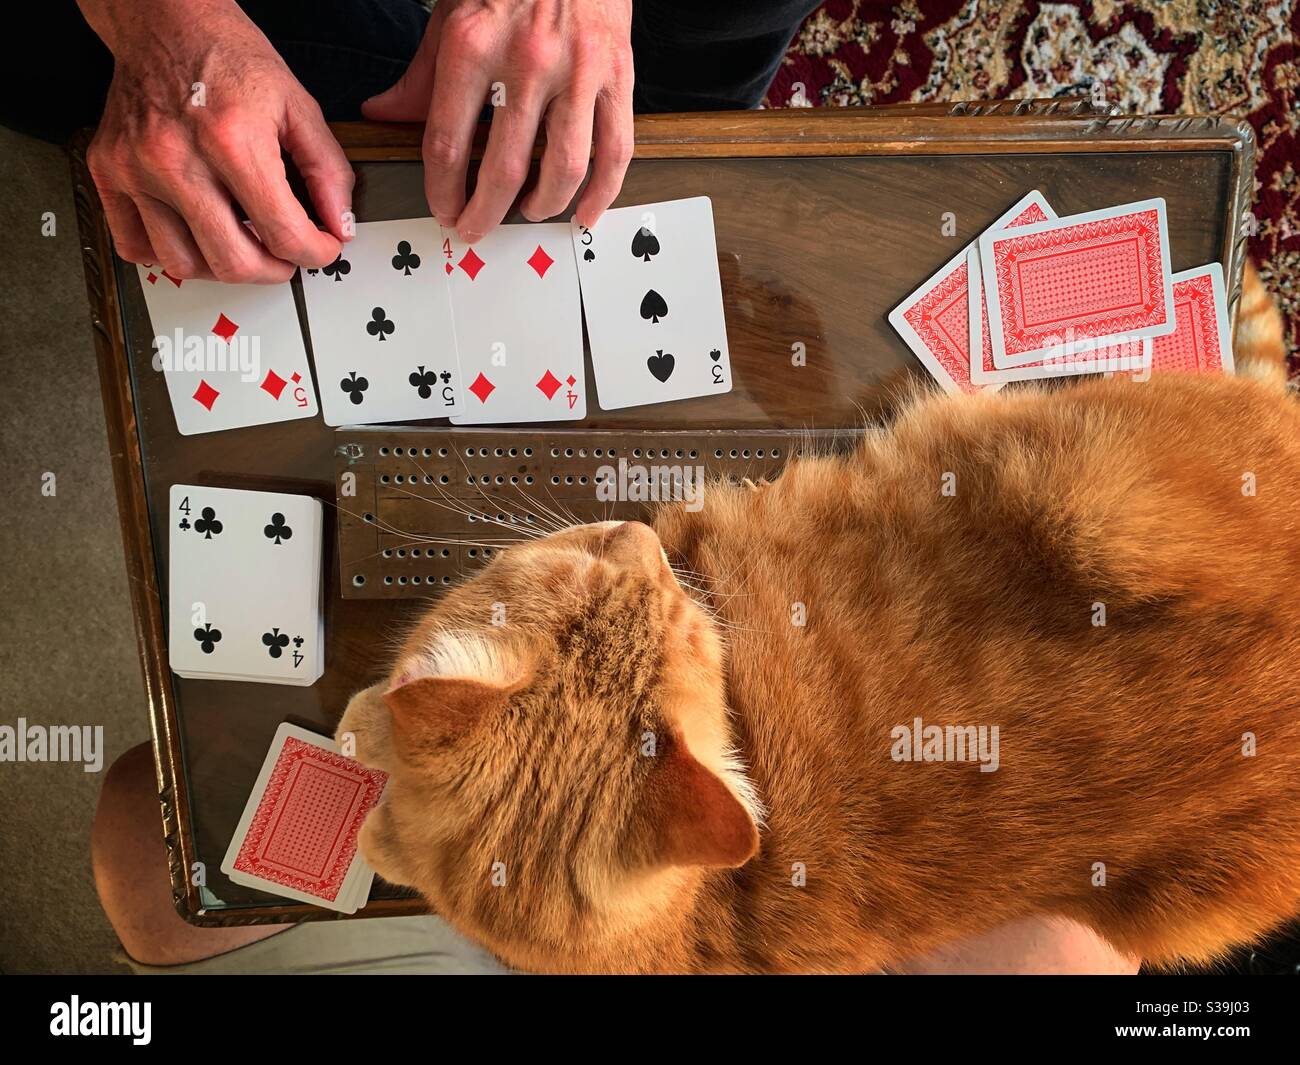 Pet domestic cat hindering couple playing game of cribbage cards. Stock Photo